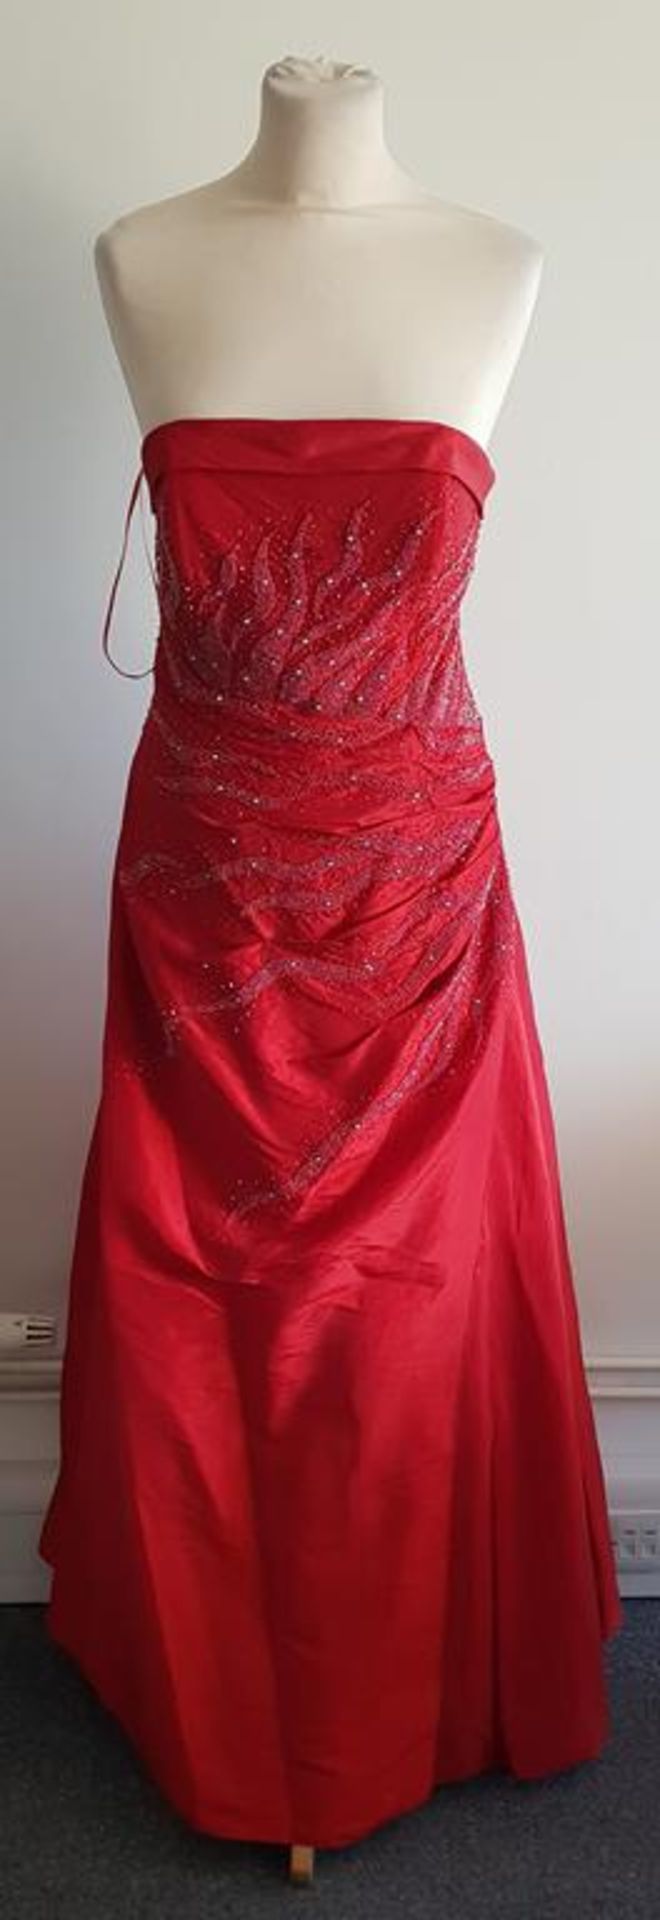 14 Dresses to include Princess 5397, red/black Evening Dress, sizes 1 x 12, 2 x 16, Hongyi 6888, - Image 16 of 28